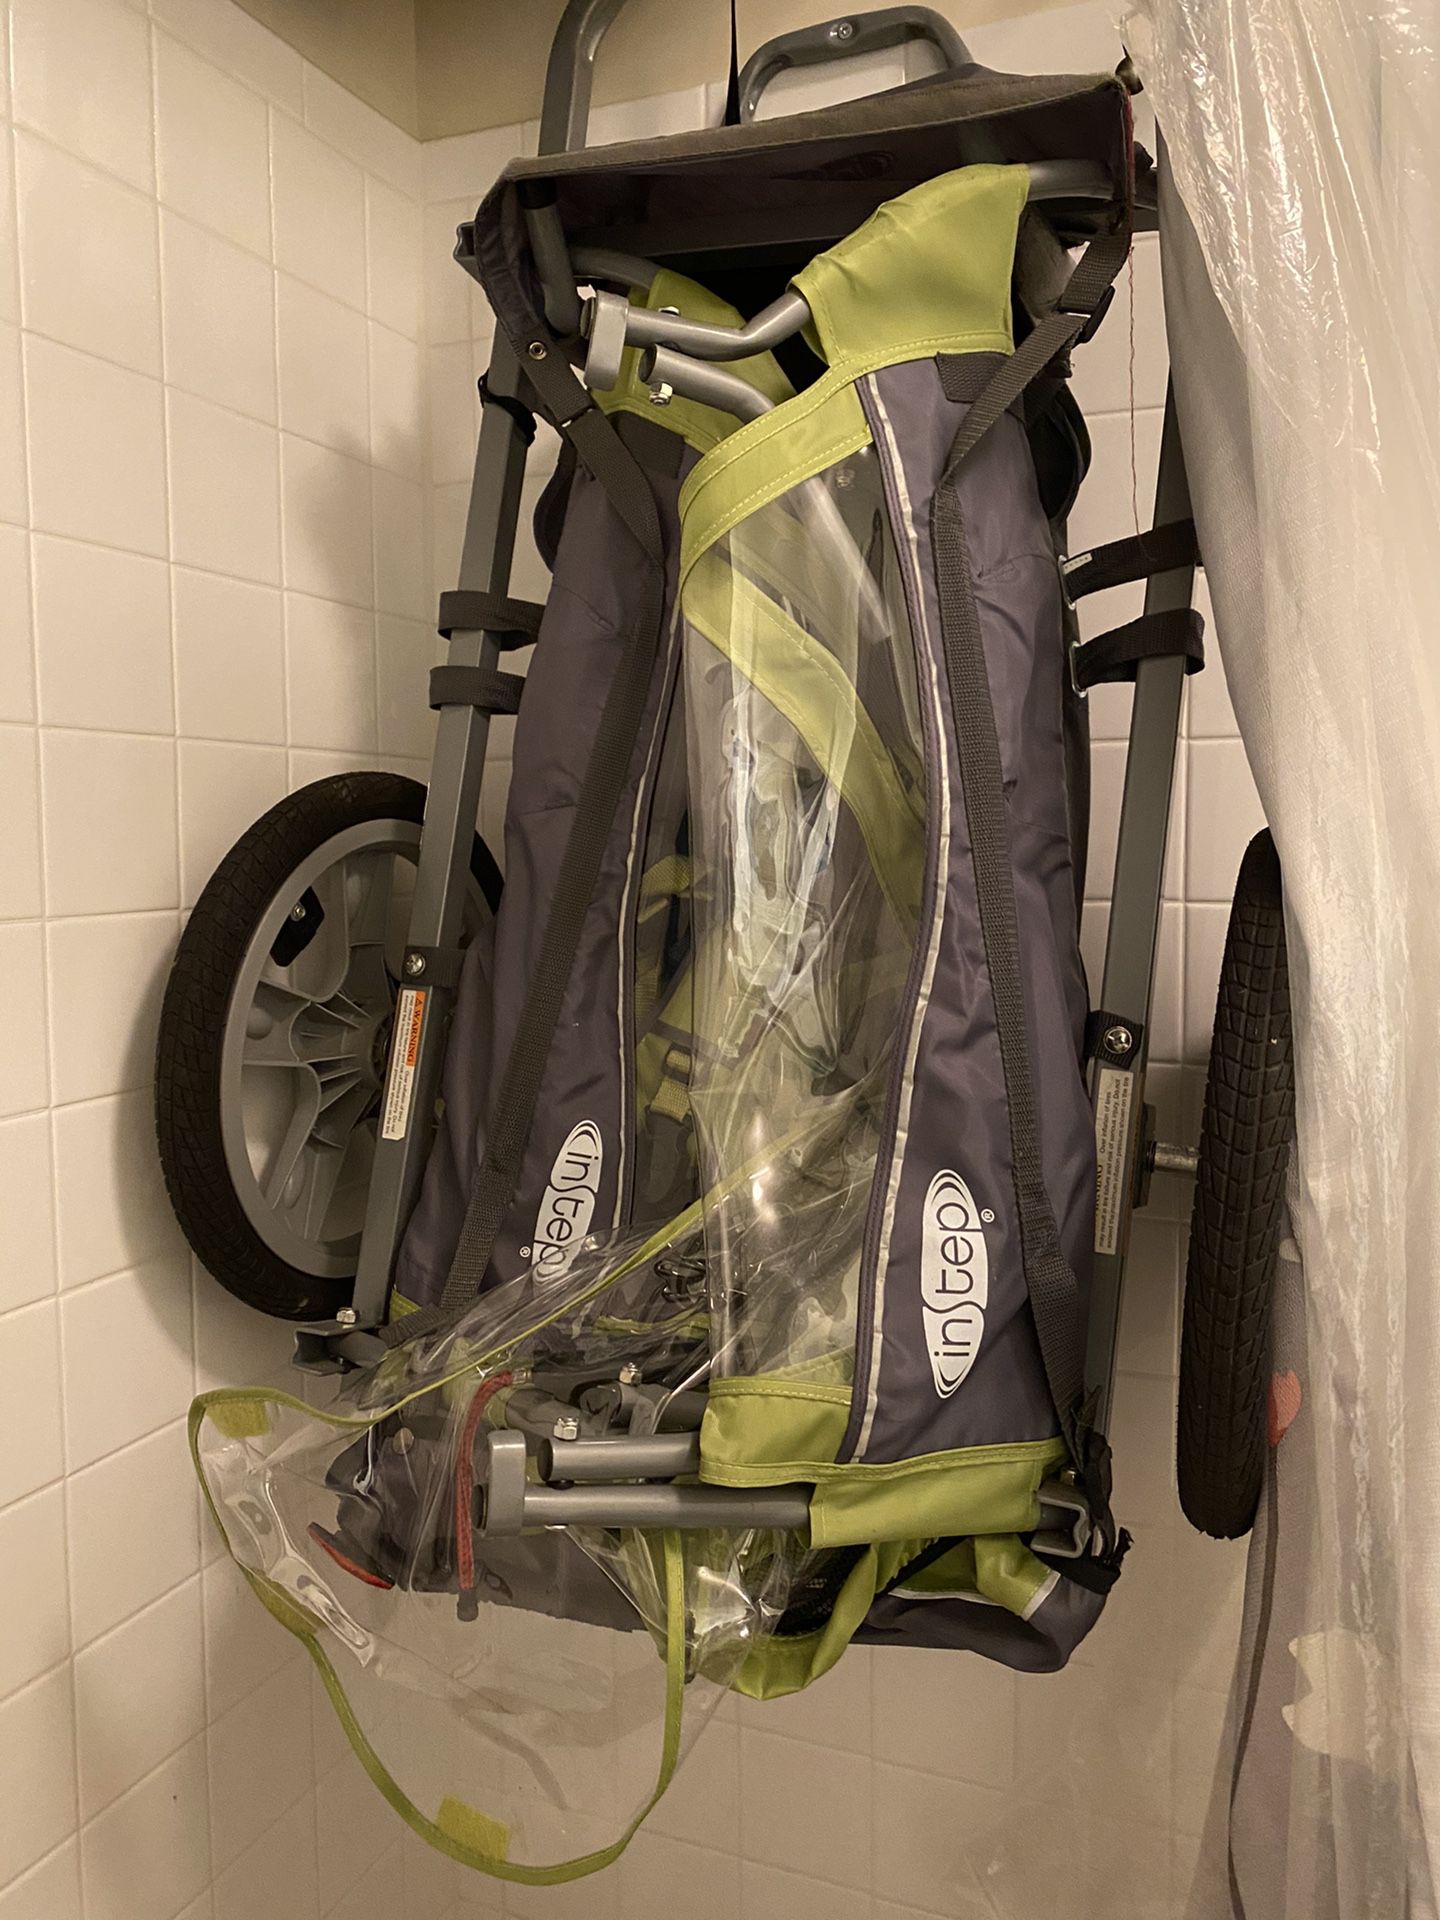 Instep bike /bicycle trailer for kids